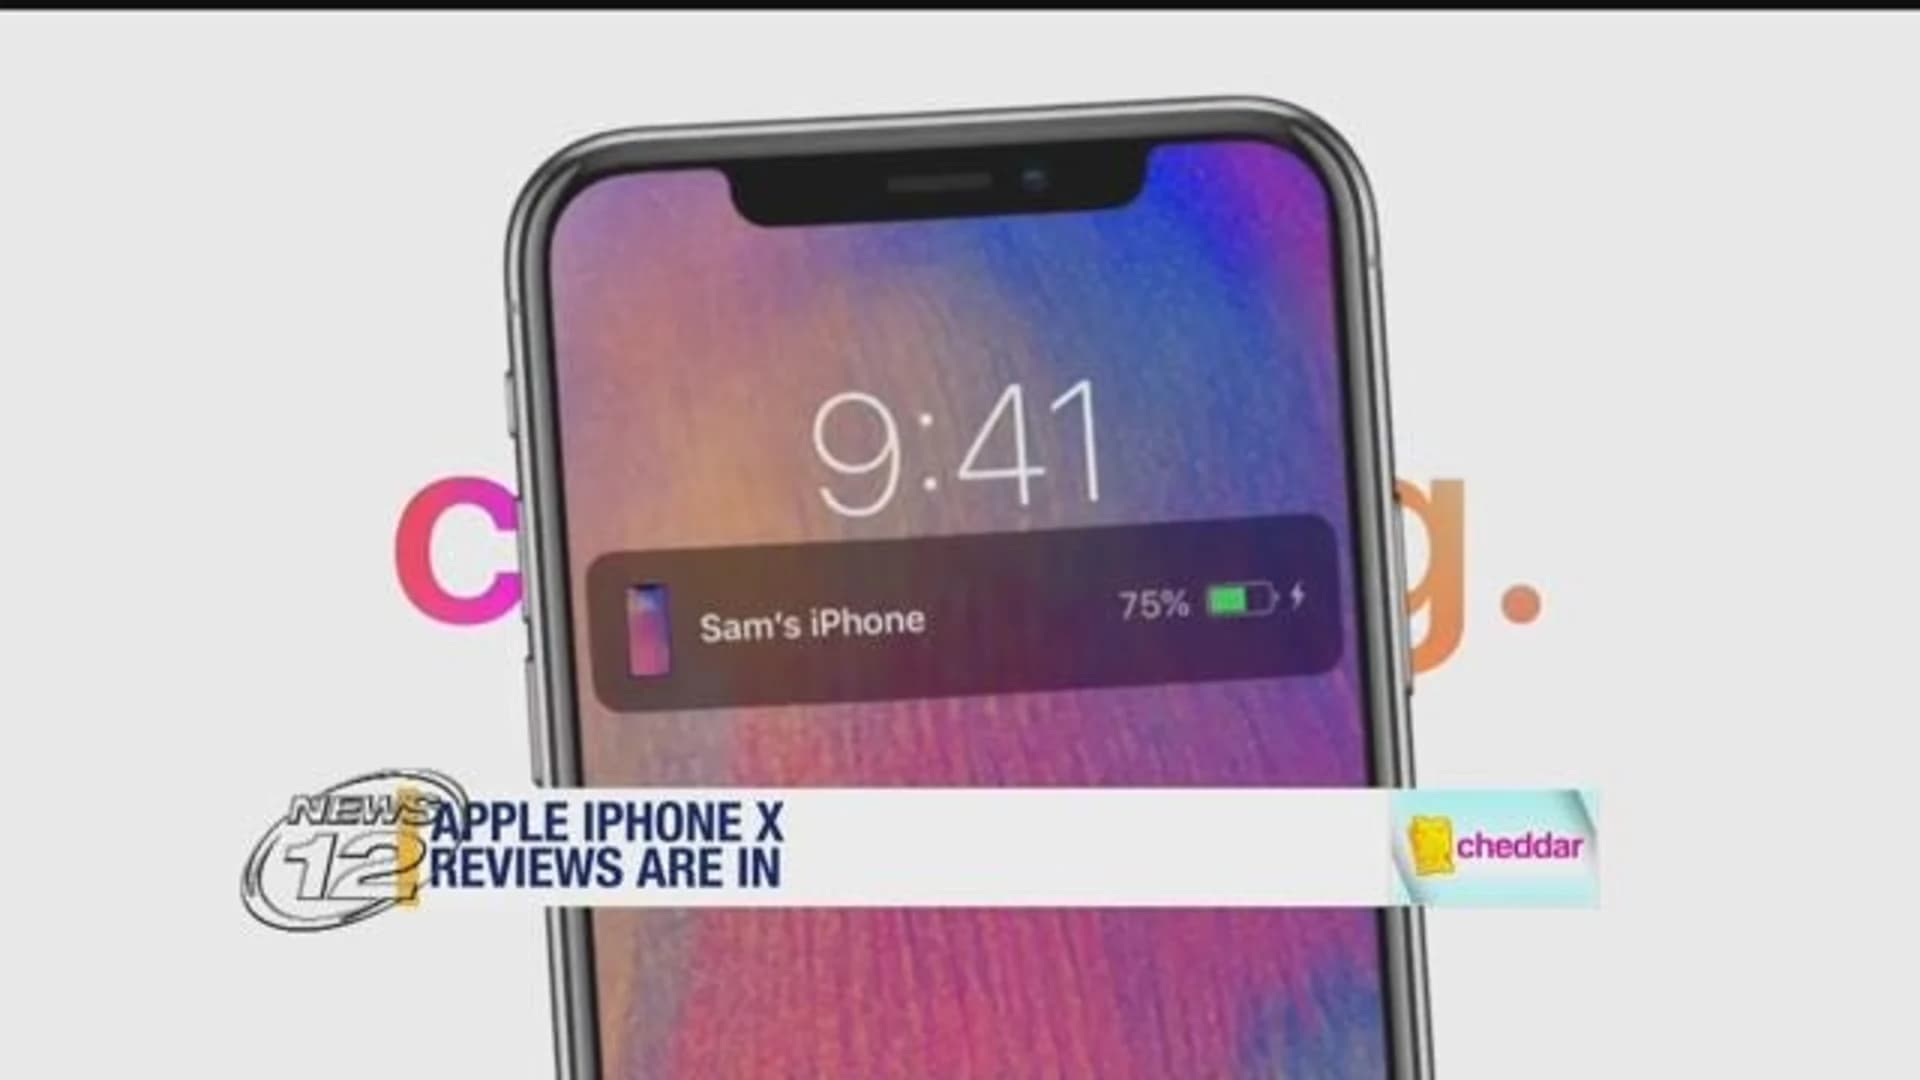 Cheddar Morning Business Update: Review of the Apple iPhone 10